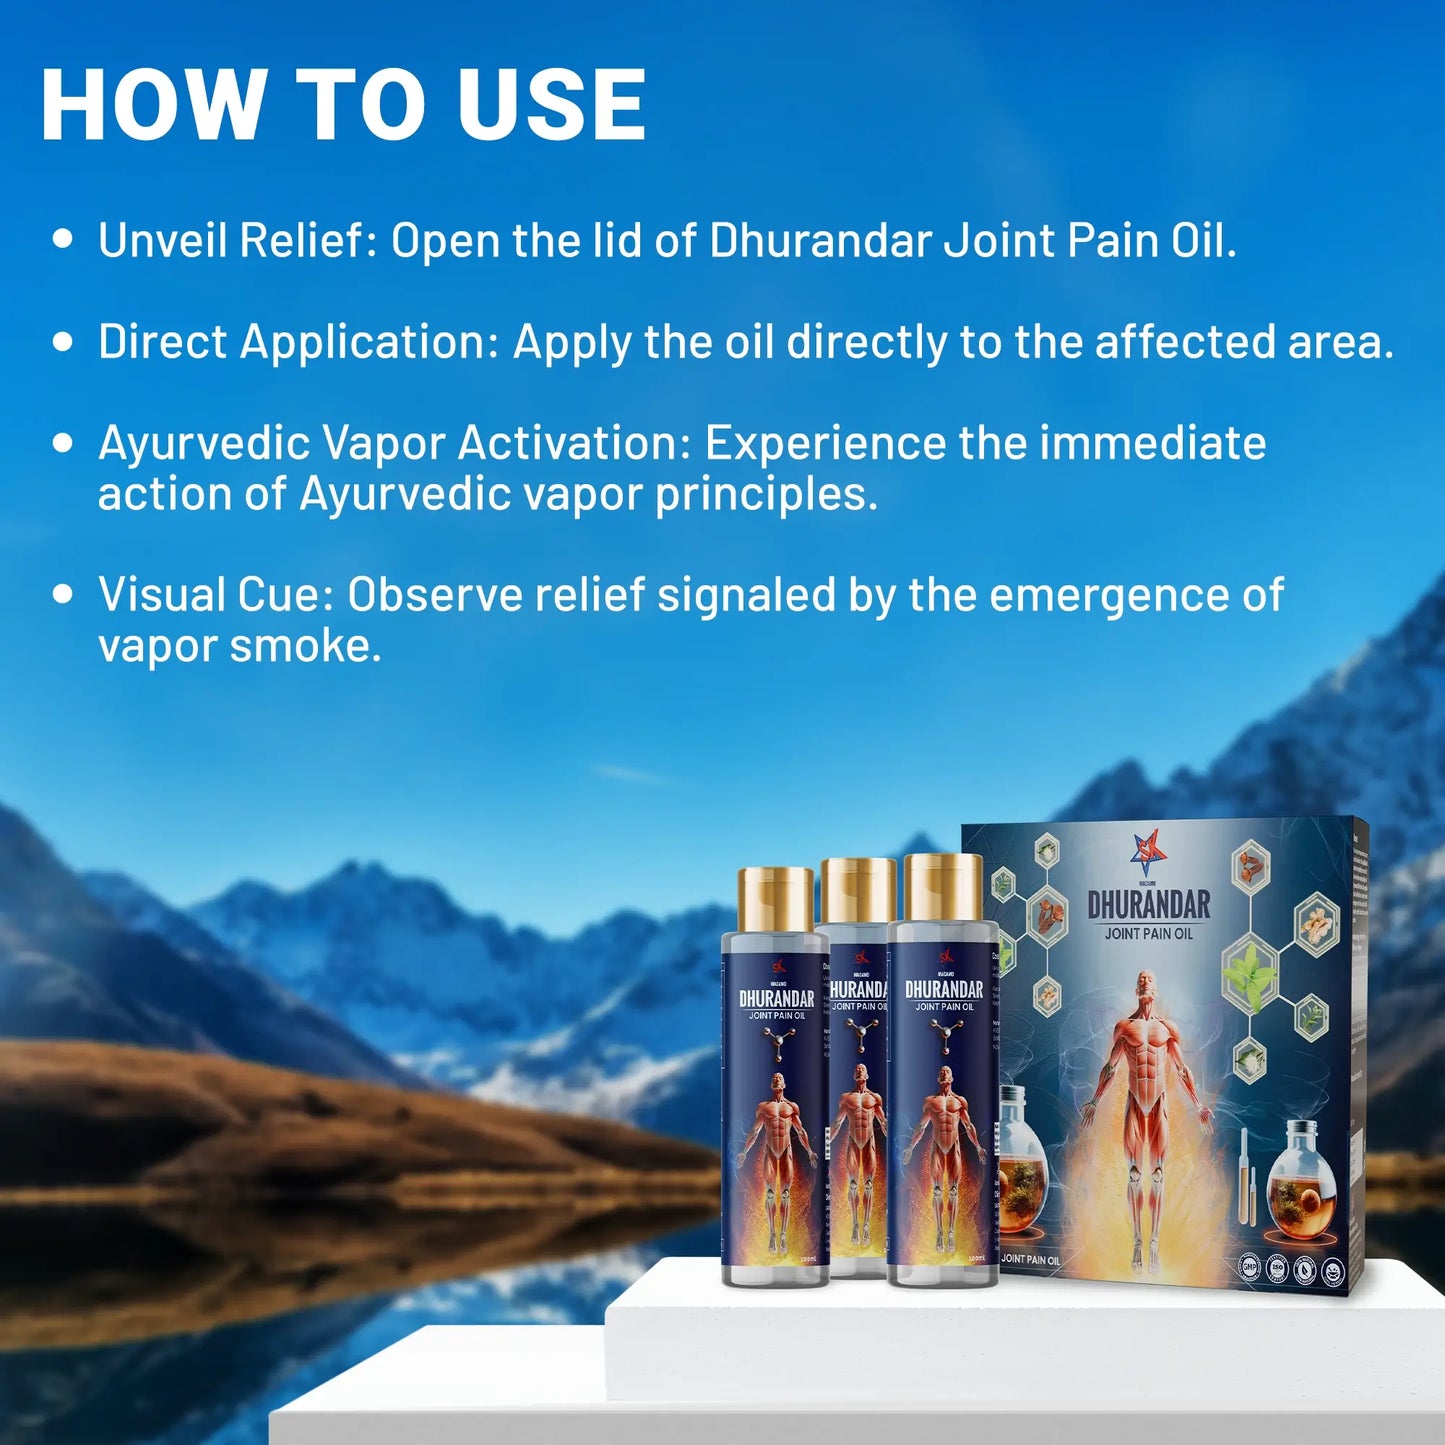 Dhurandar Oil with Unique Vapor Principal for Instant Pain Relief | Knee Joint Pain Treatment Ayurvedic | Works for Joint and Muscle Pain Relief and Ligament Support